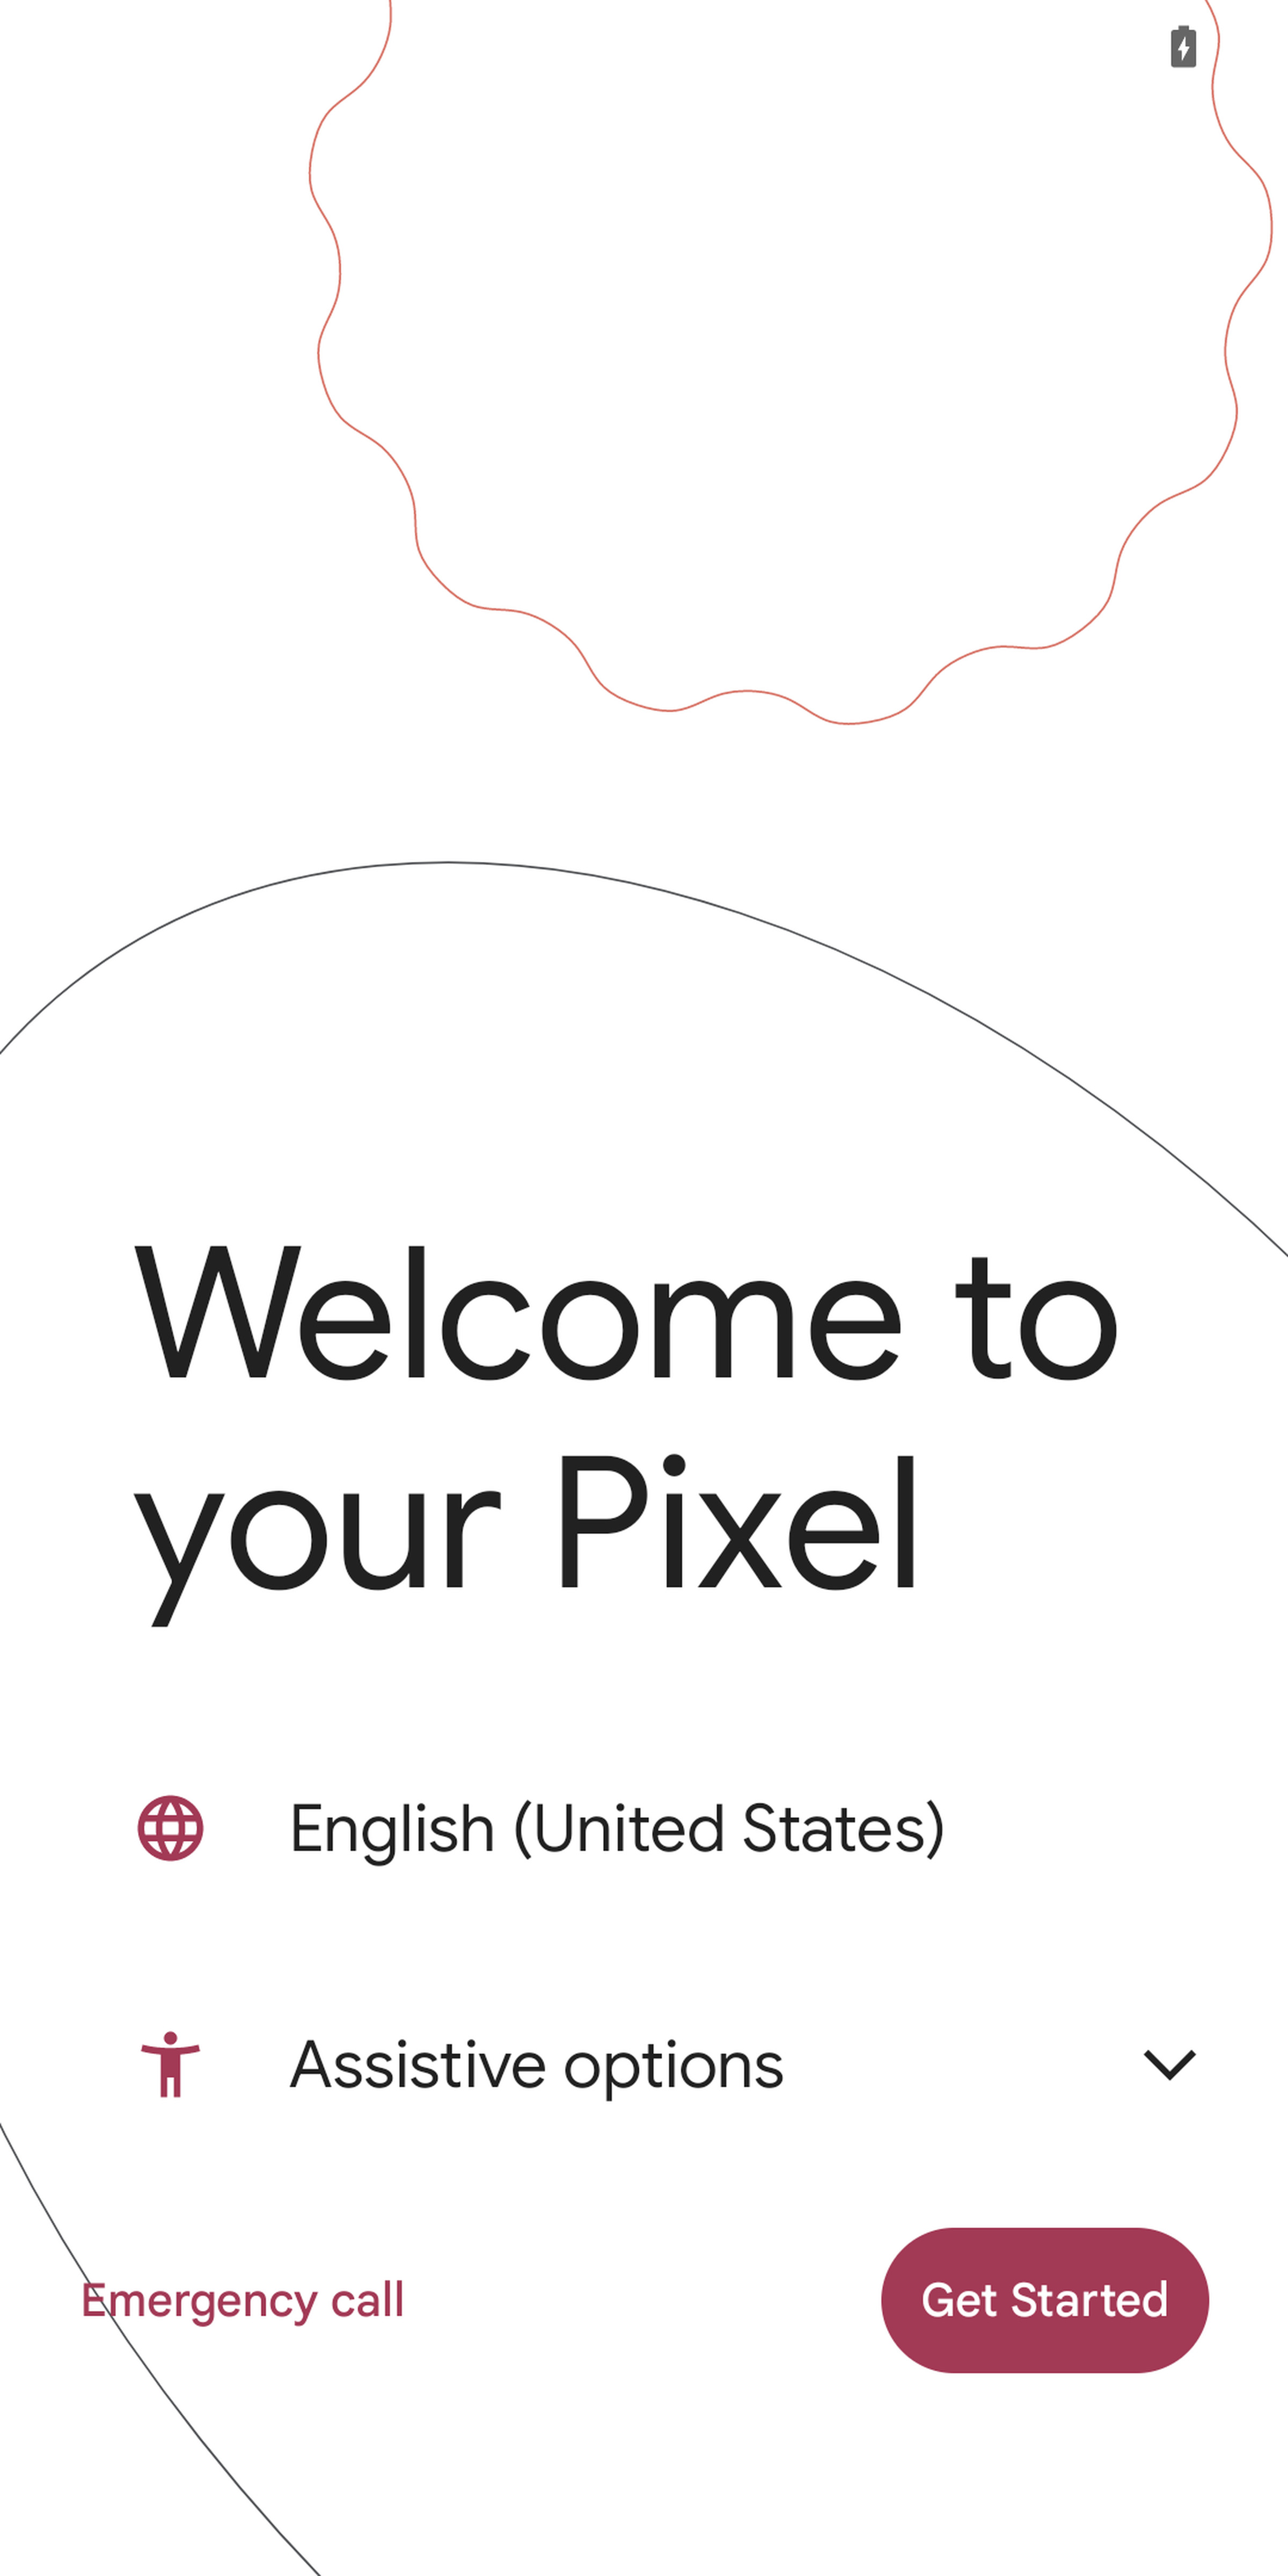 Page: Welcome to your Pixel